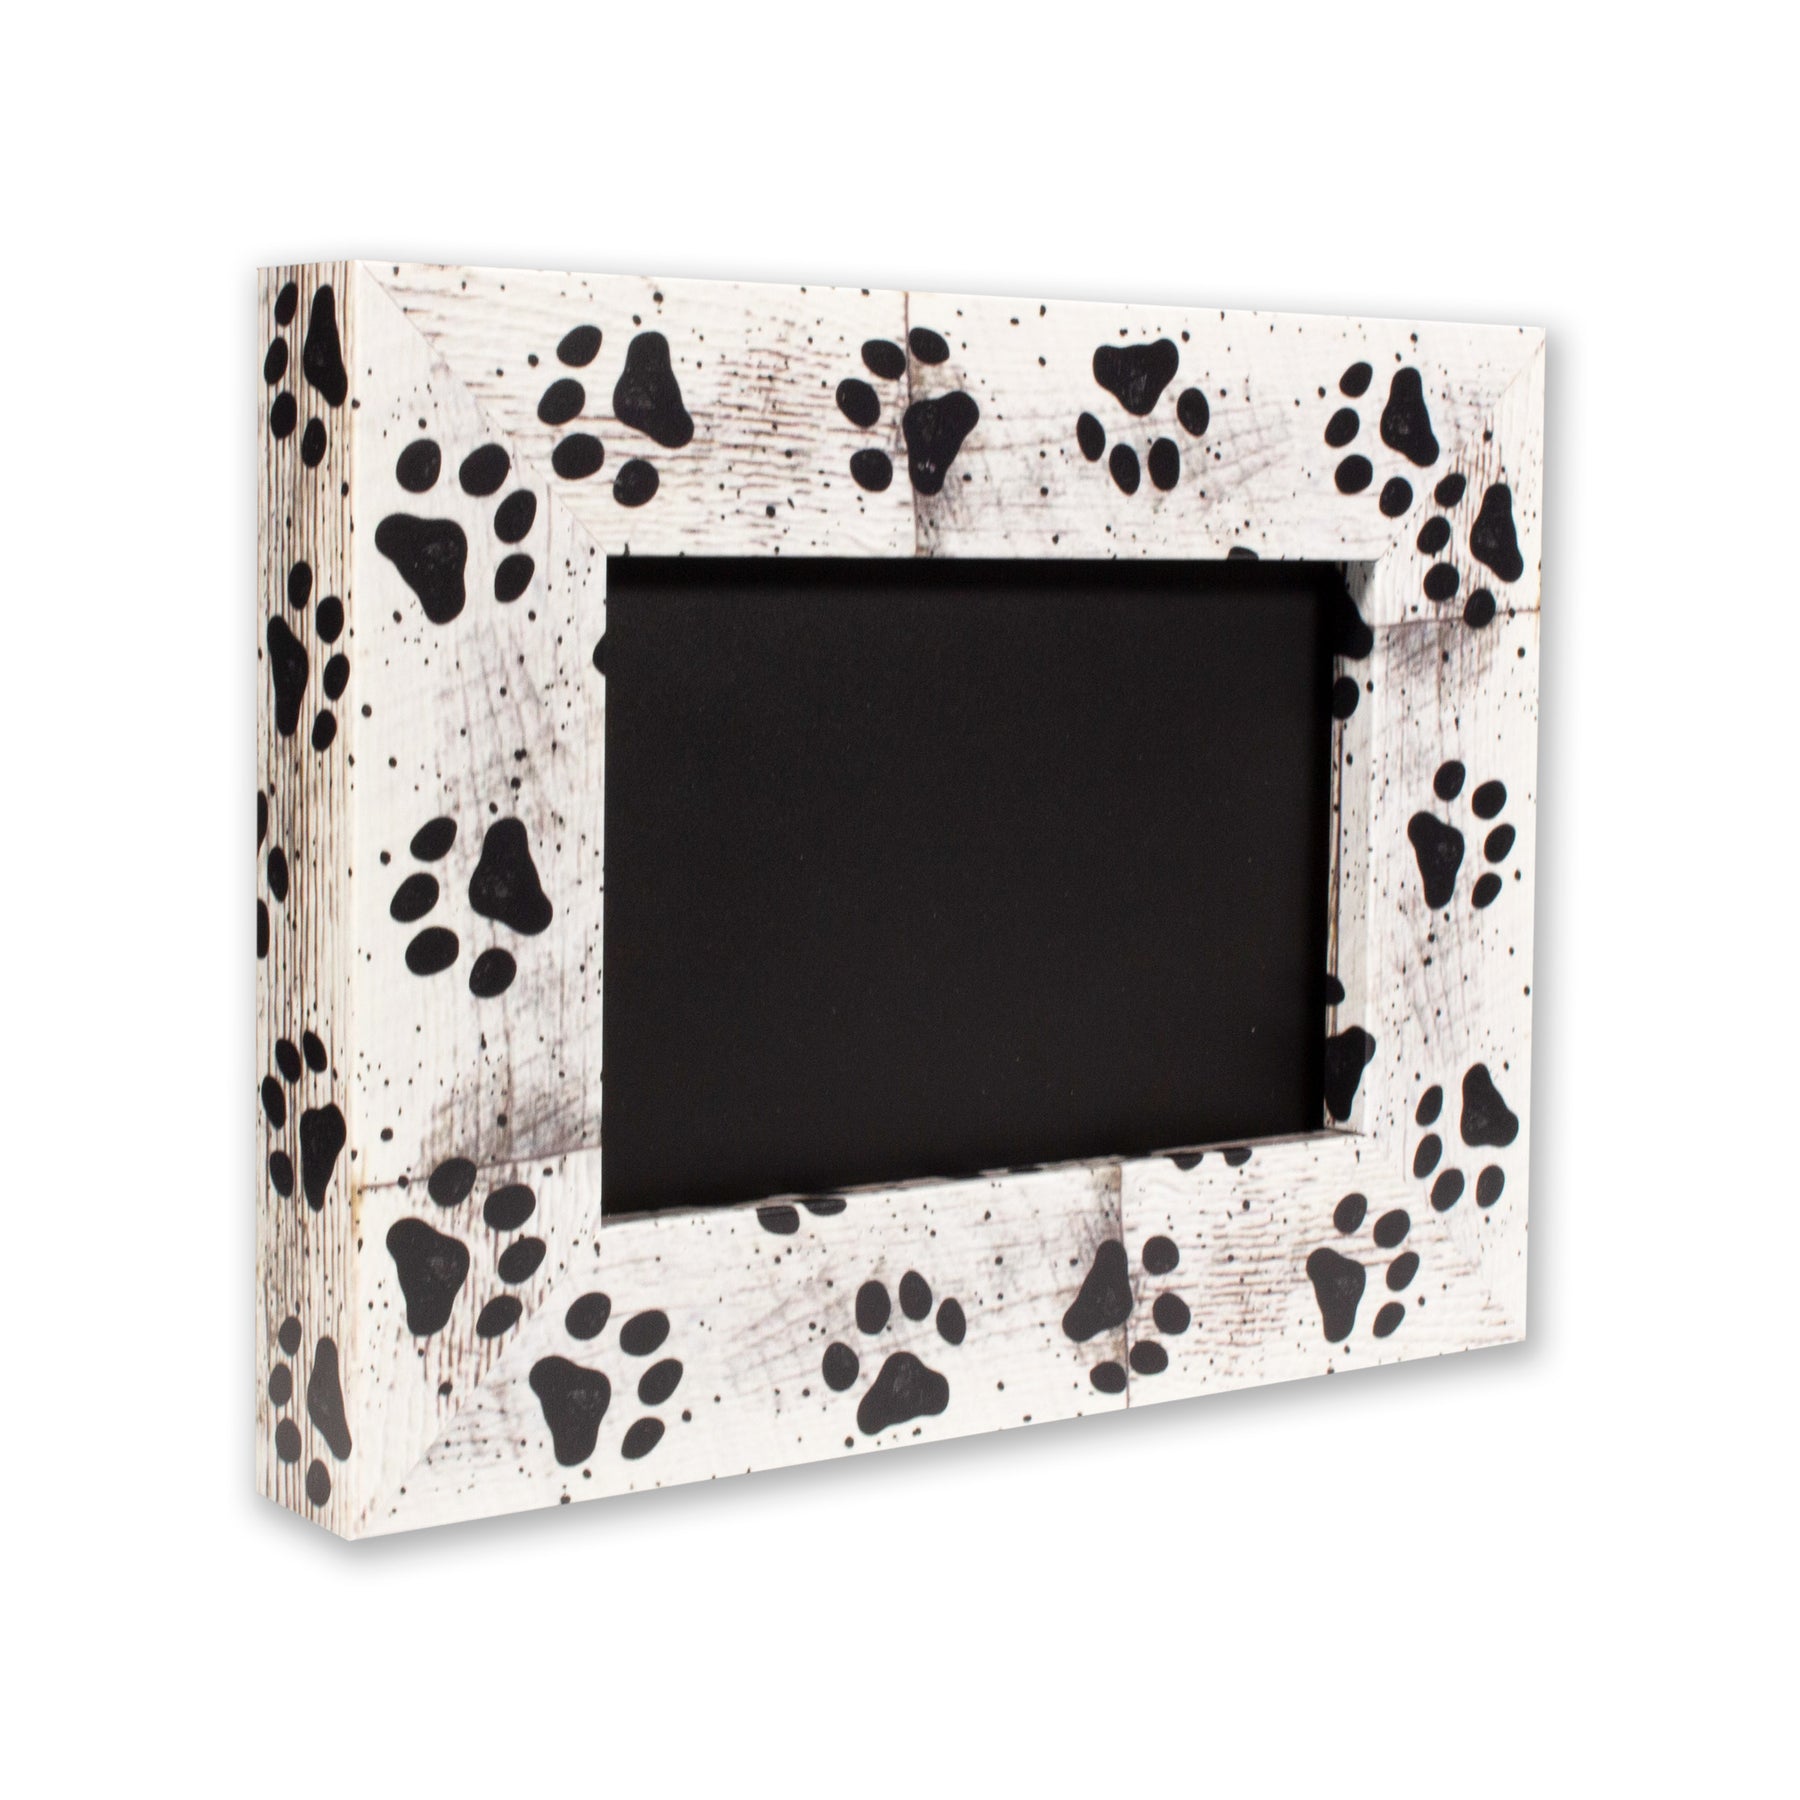 A paw print picture frame